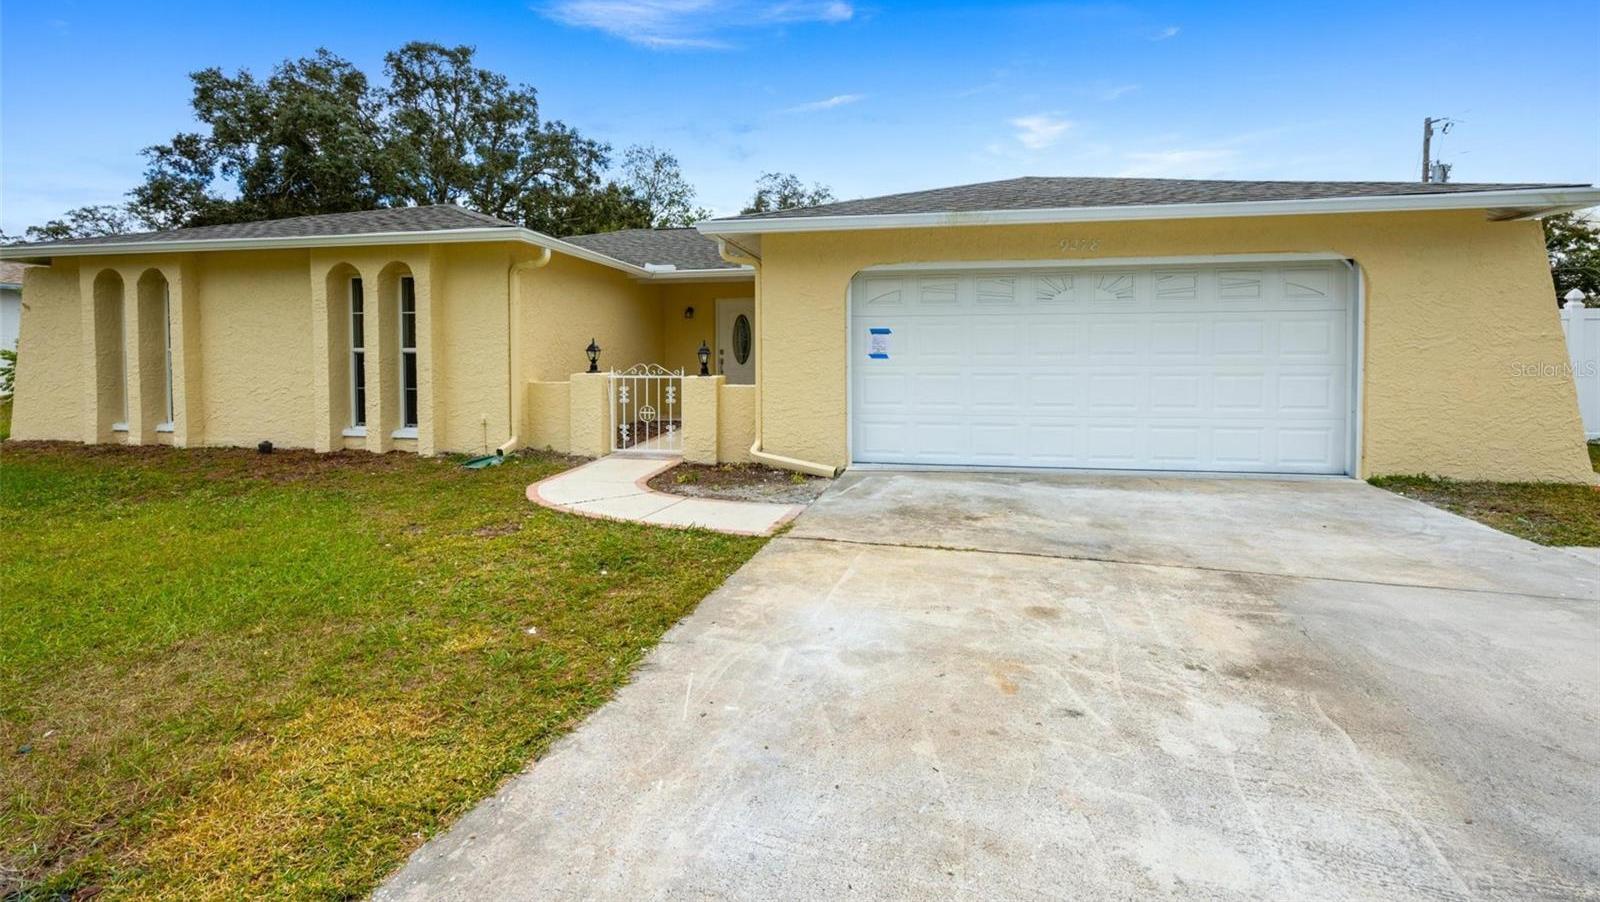 Photo one of 9278 Picasso St Spring Hill FL 34608 | MLS T3482453